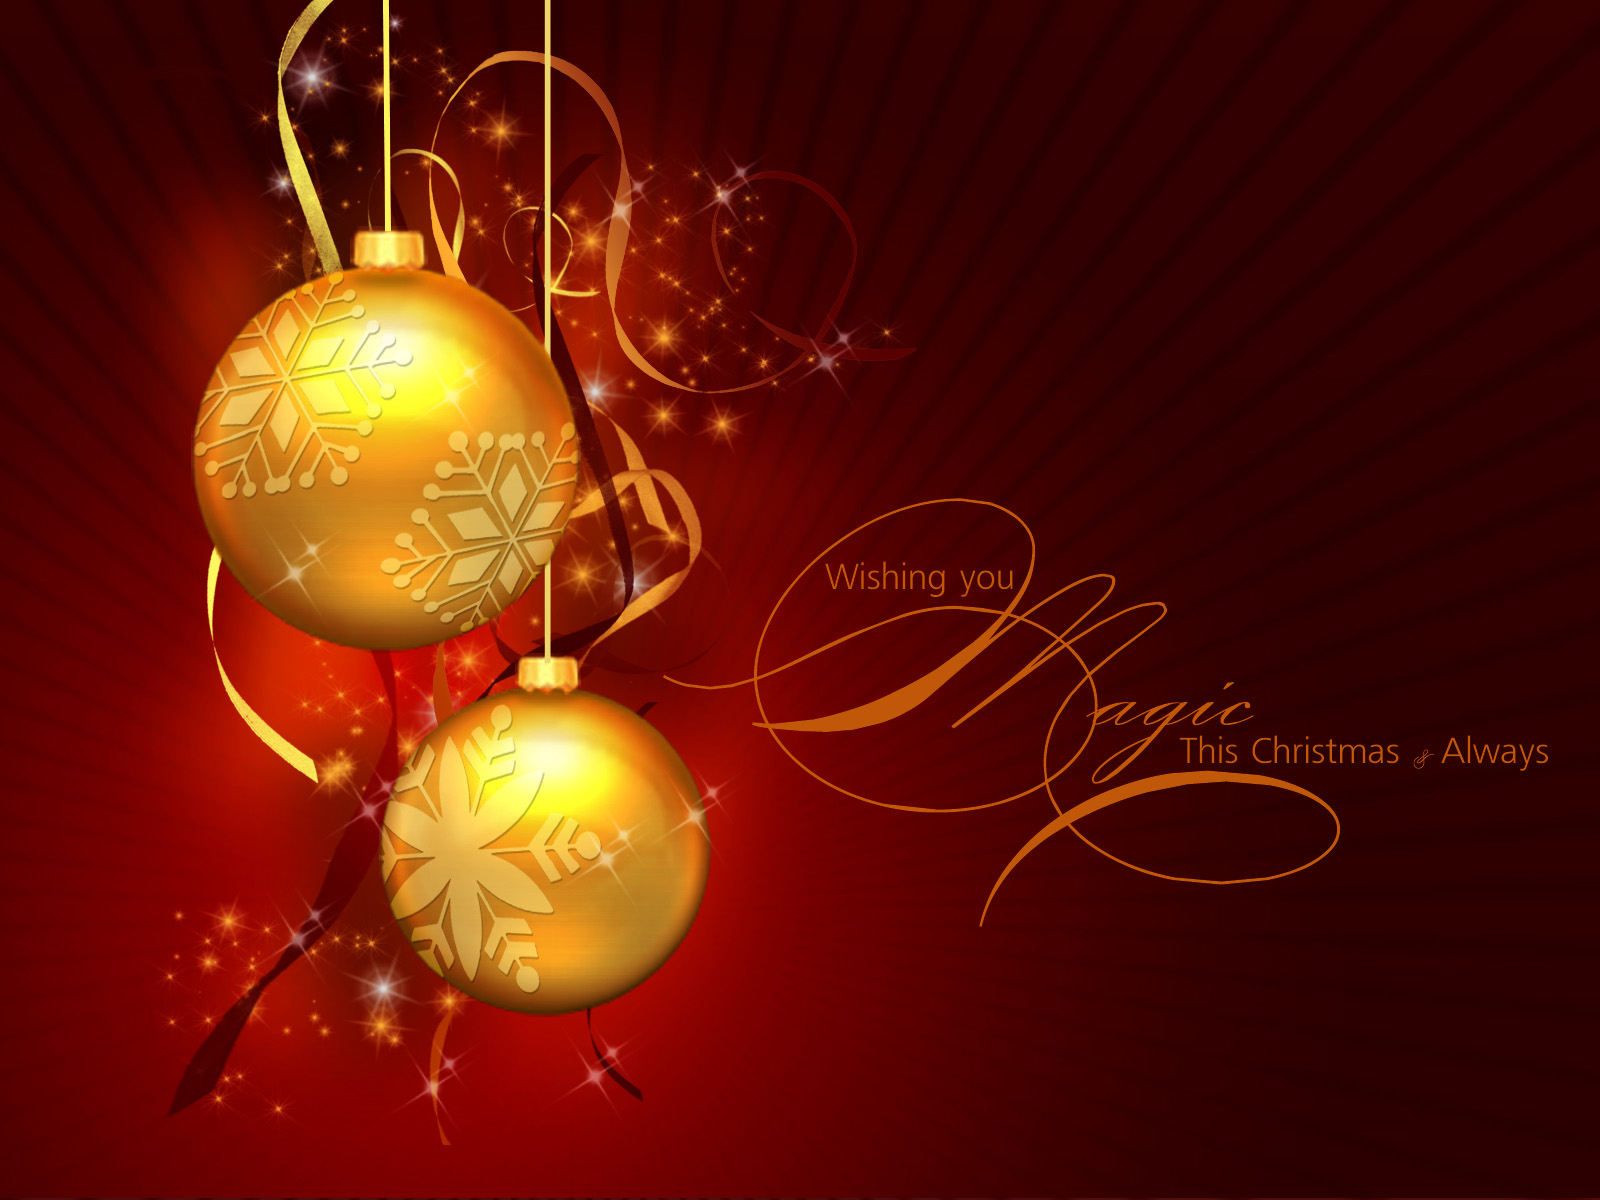 Merry Christmas Wallpaper Red 2016 Free Download.